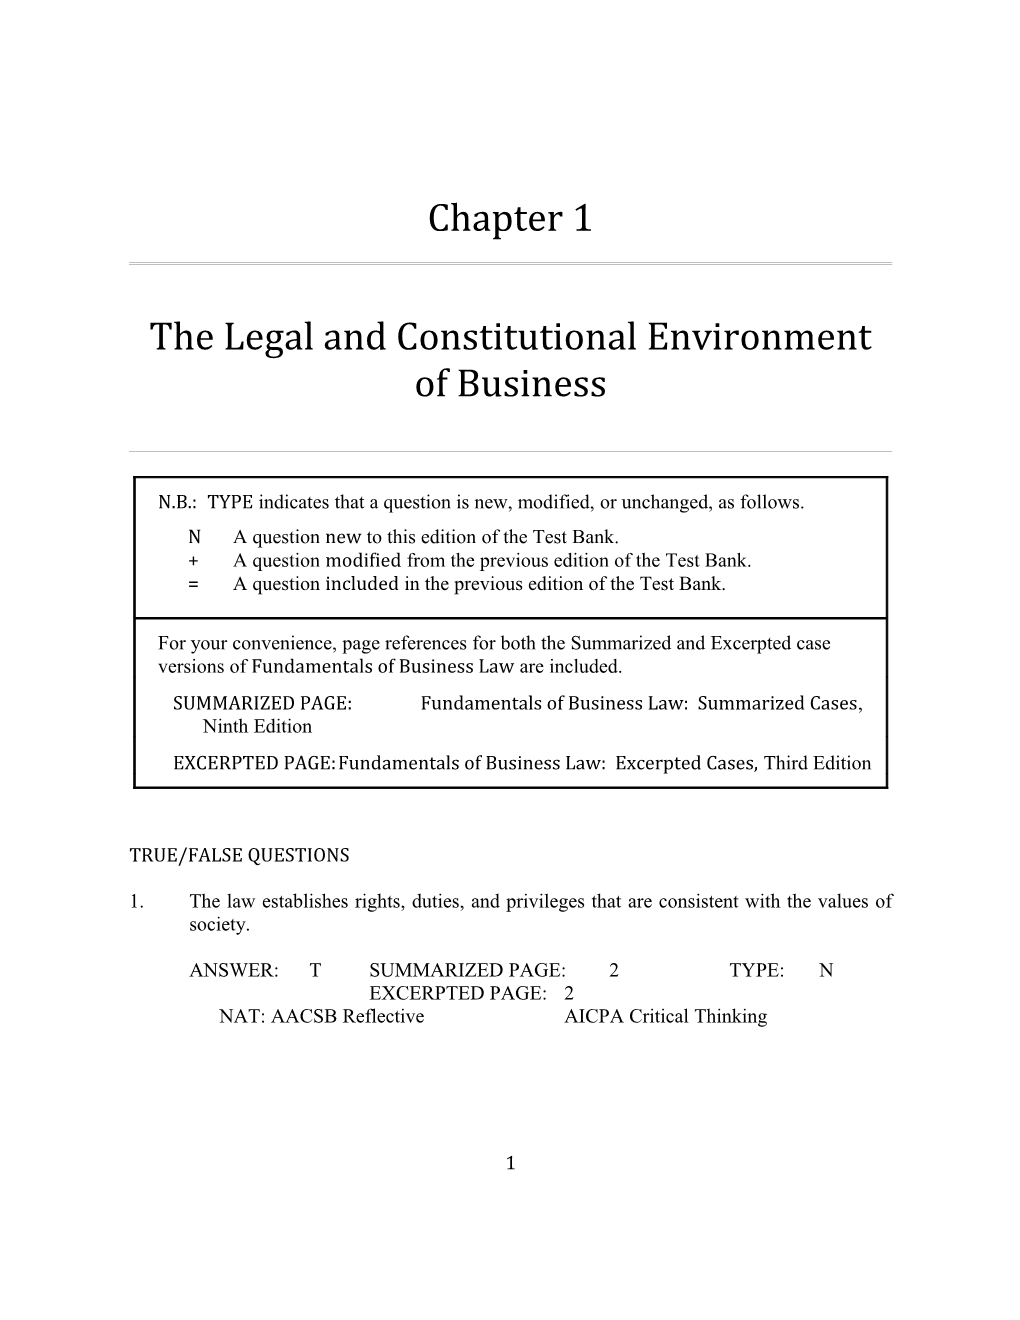 Chapter 1: the Legal and Constitutional Environment of Business 21